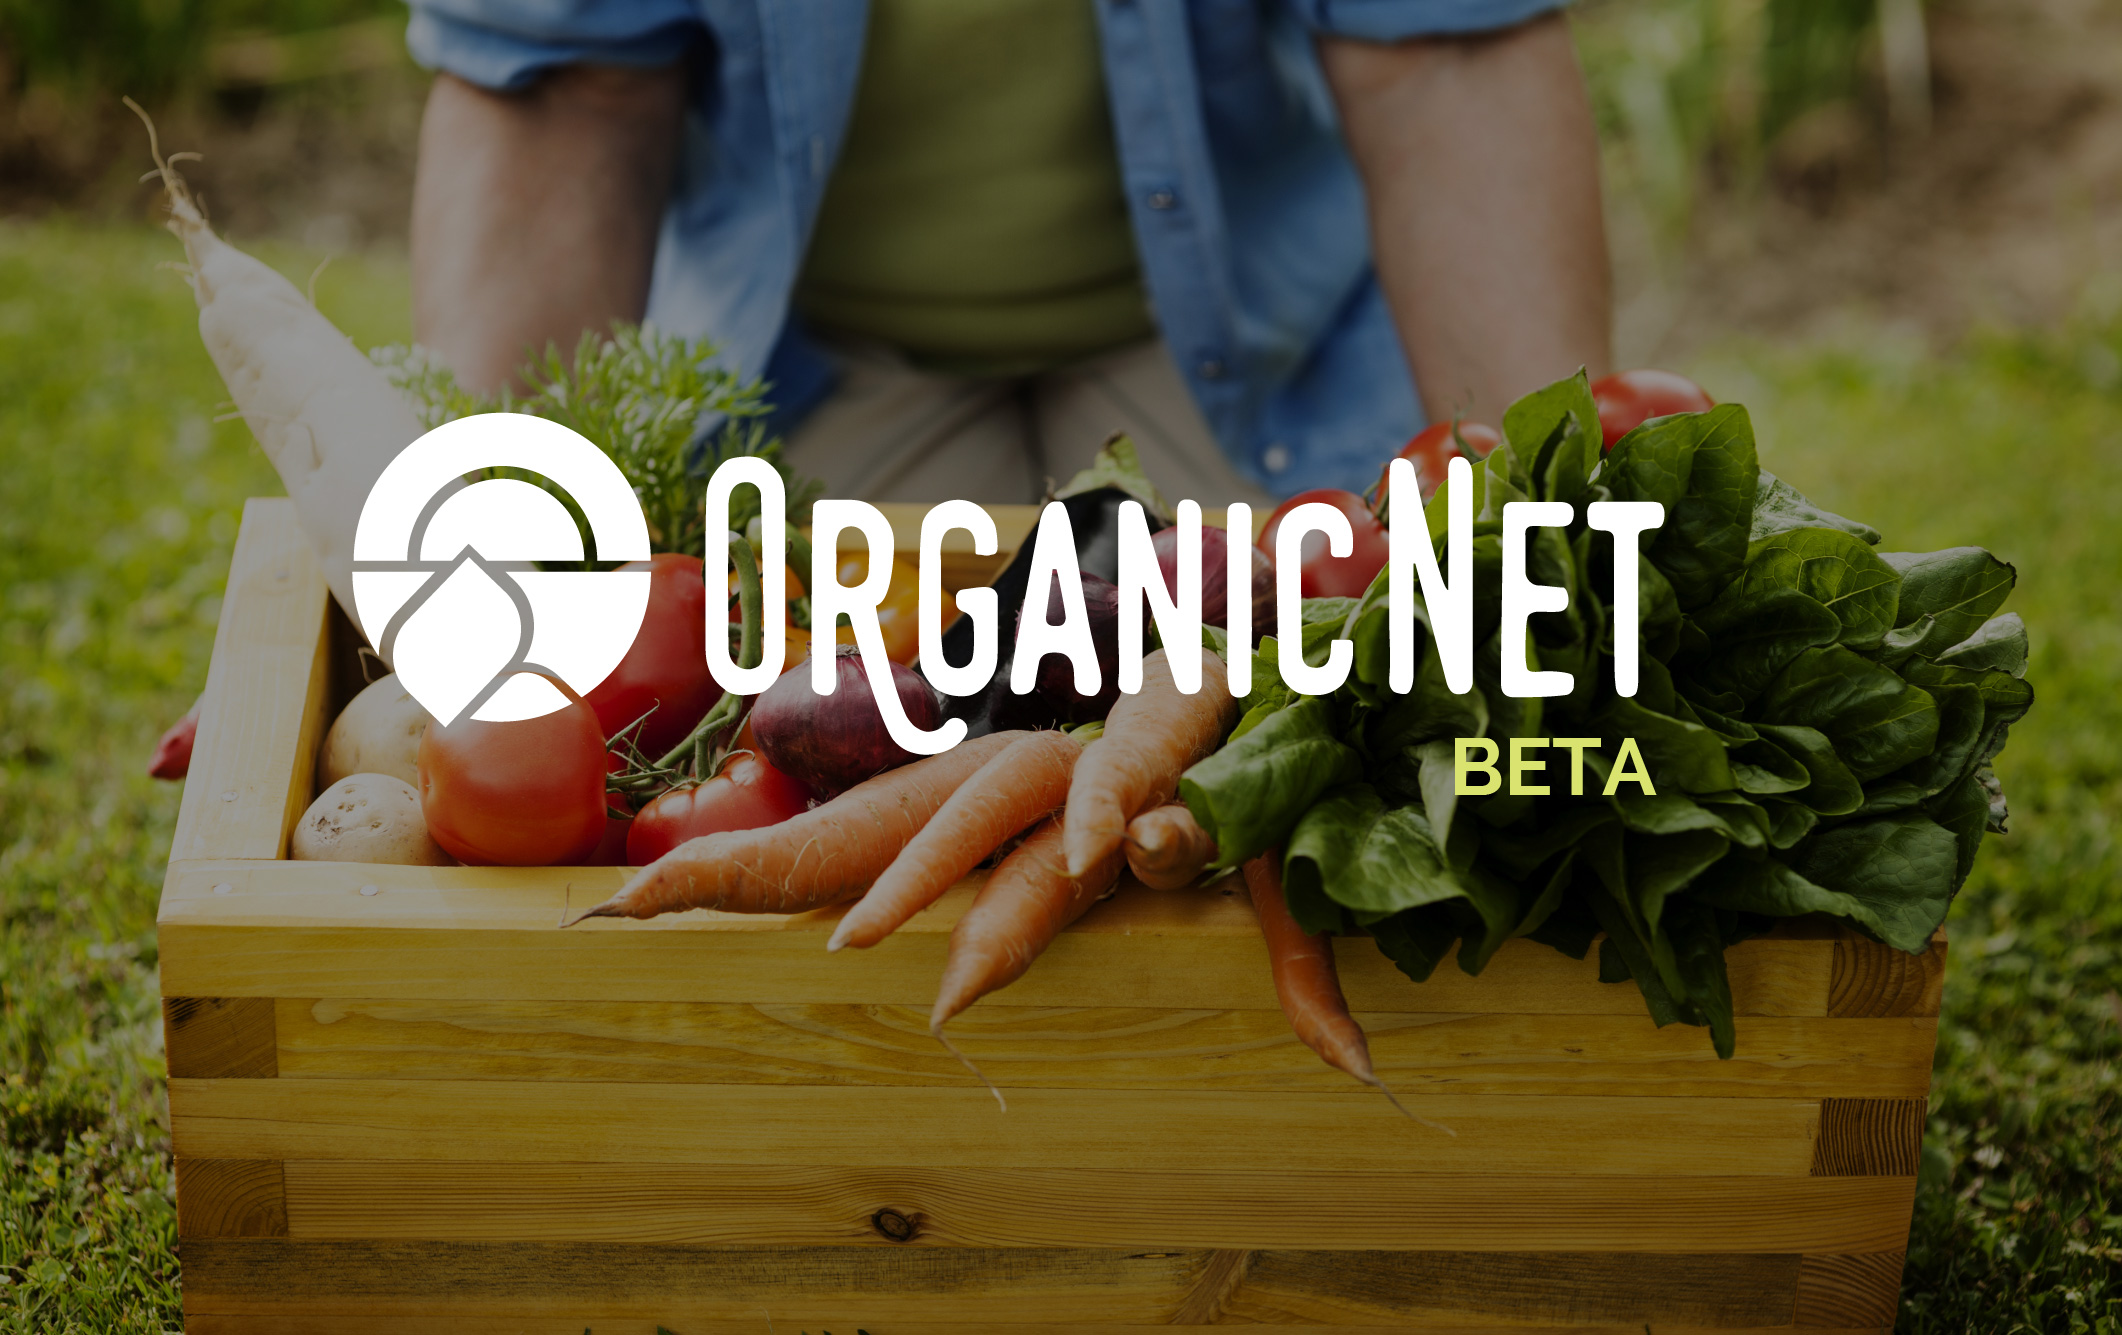 Our startup OrganicNet is in private beta